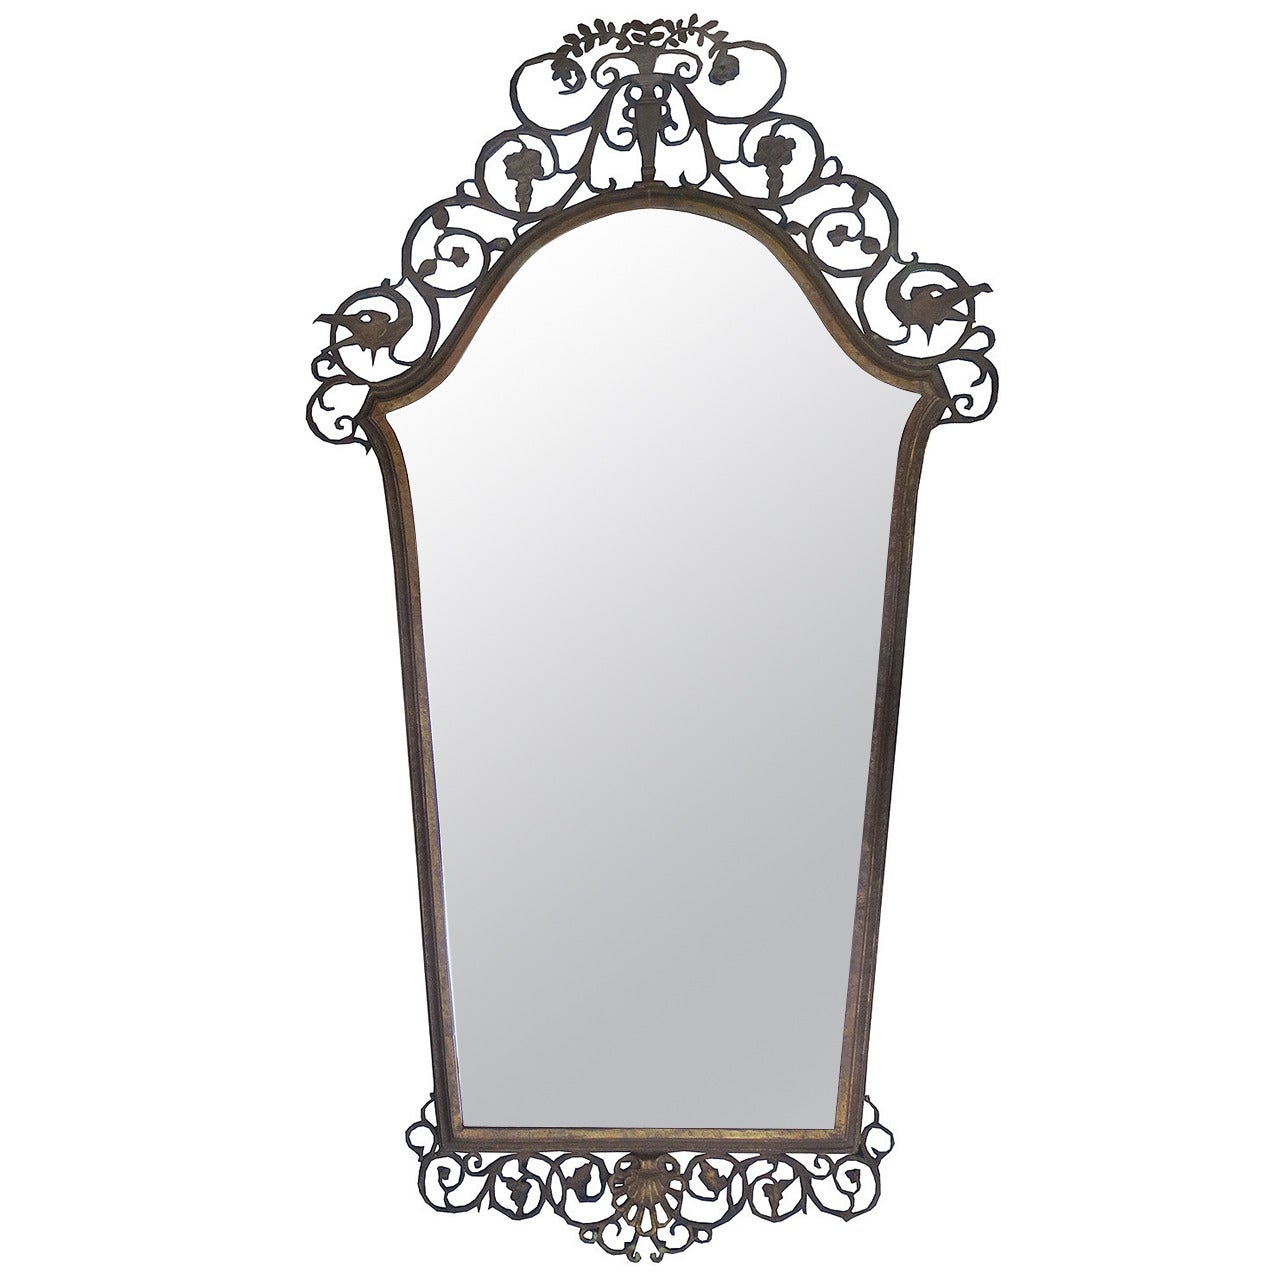 Incredible 20th Century Bronze Framed Mirror Attributed to Oscar Bach